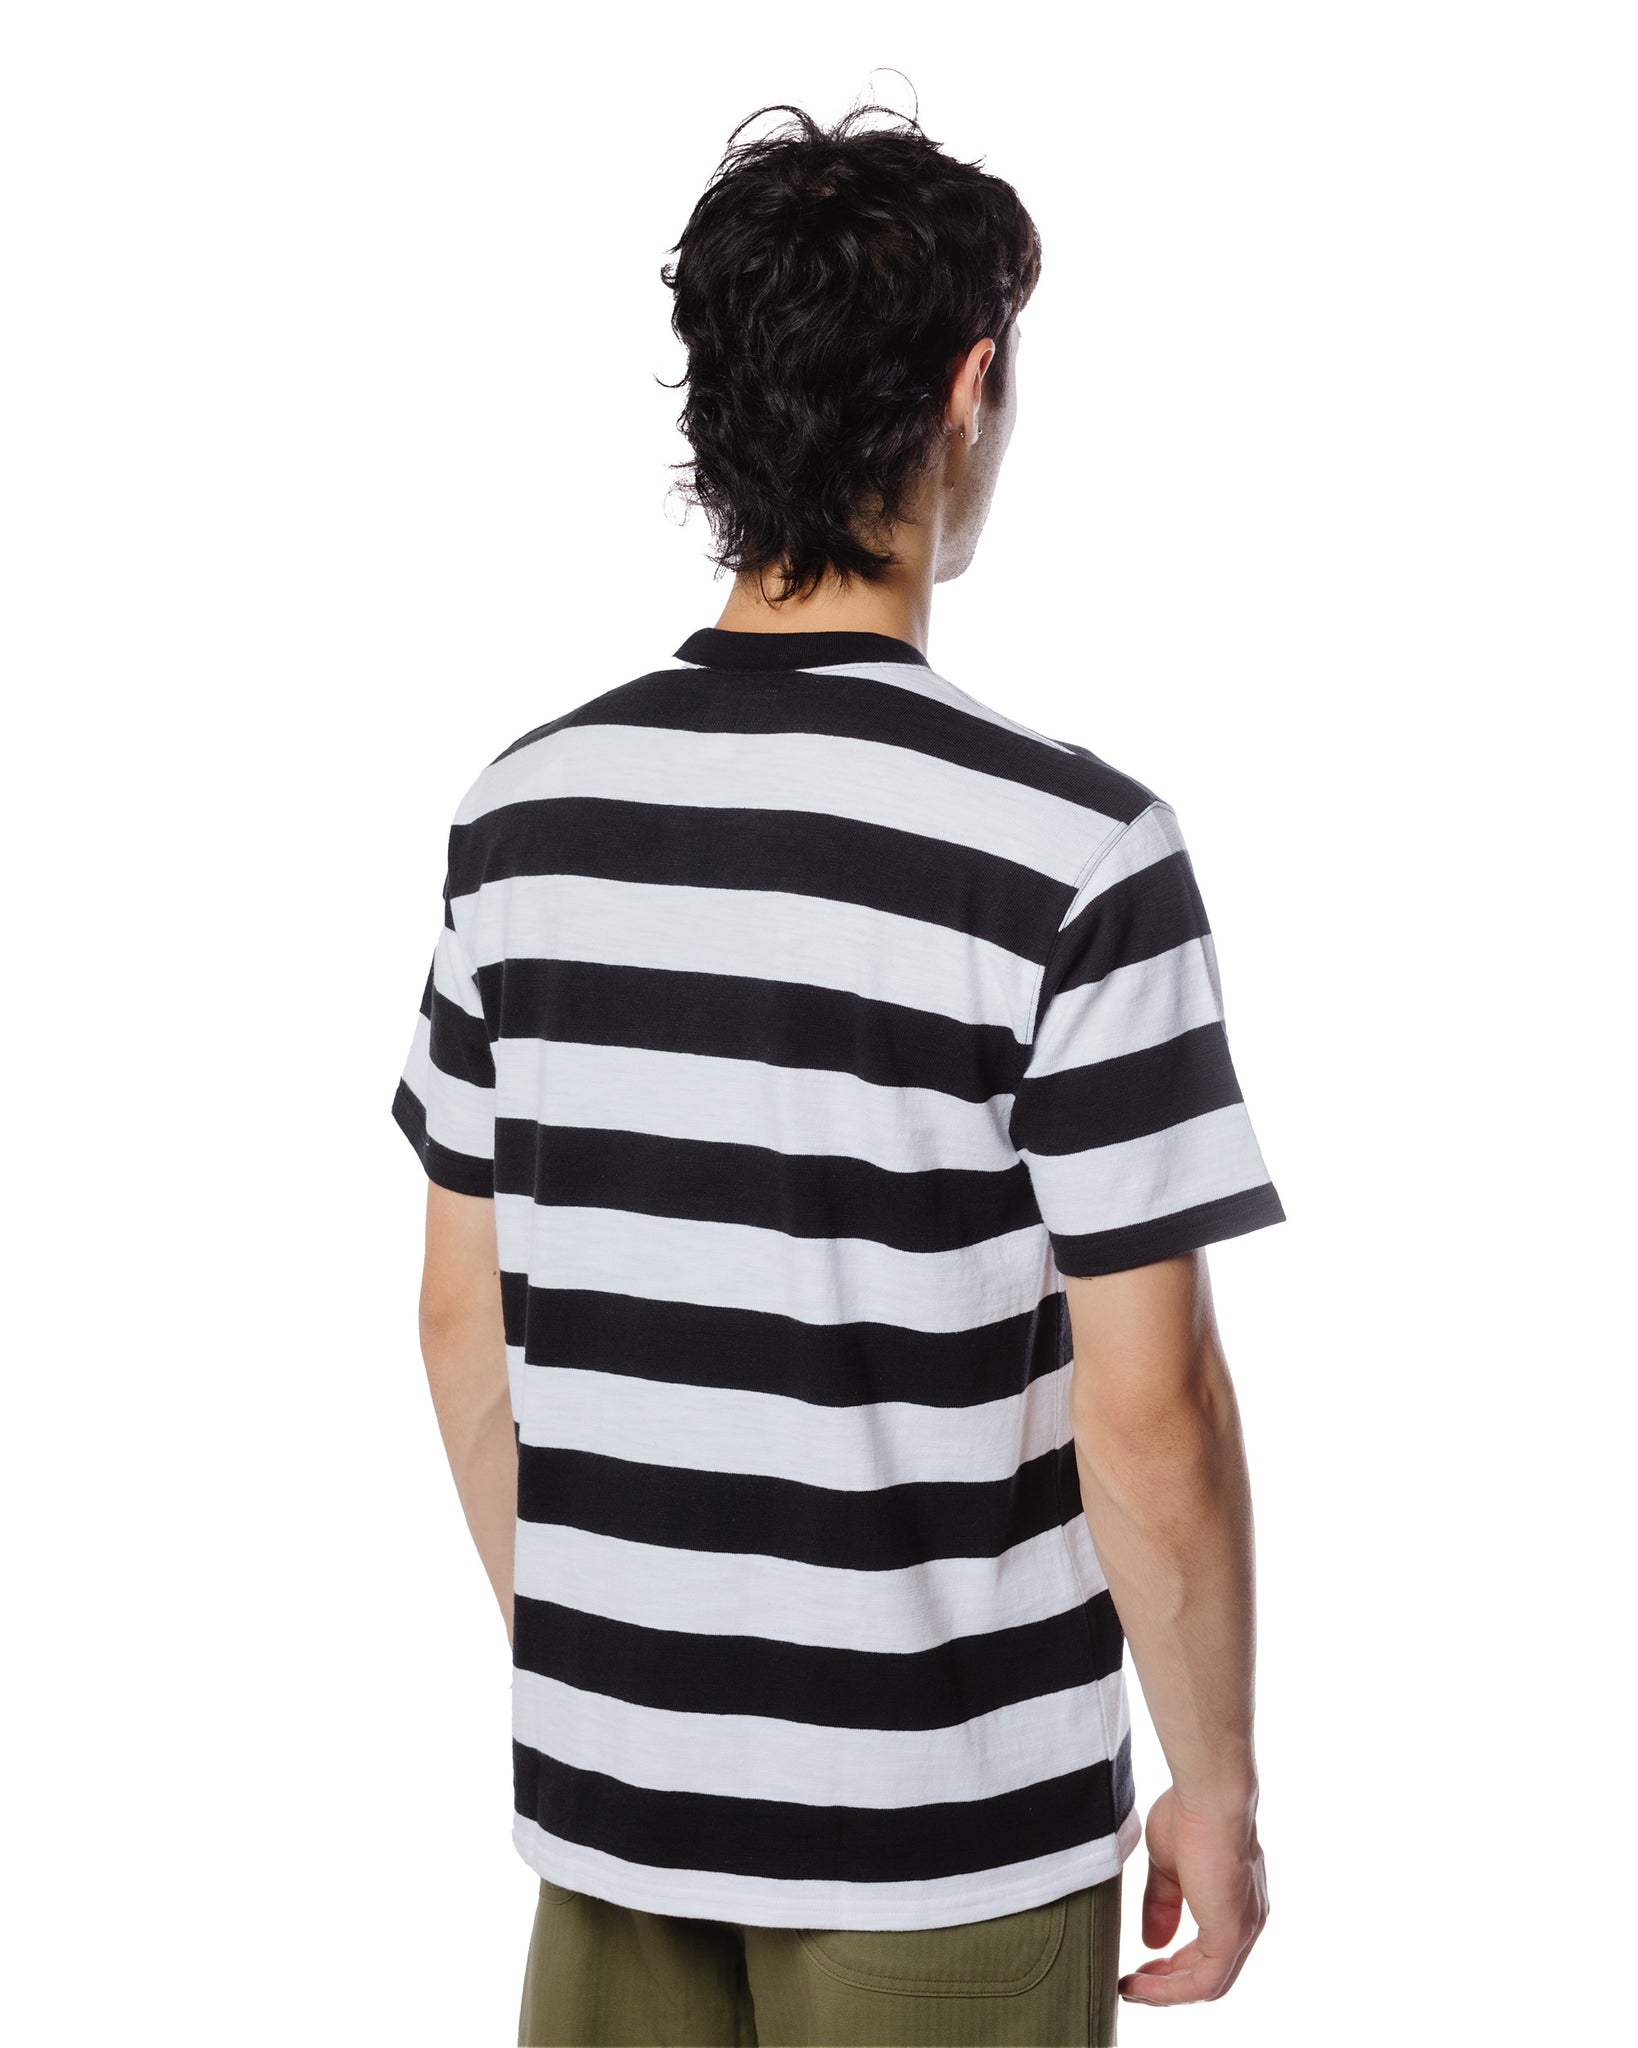 The Real McCoy's BC20007 Buco Stripe Tee S/S White Model Rear